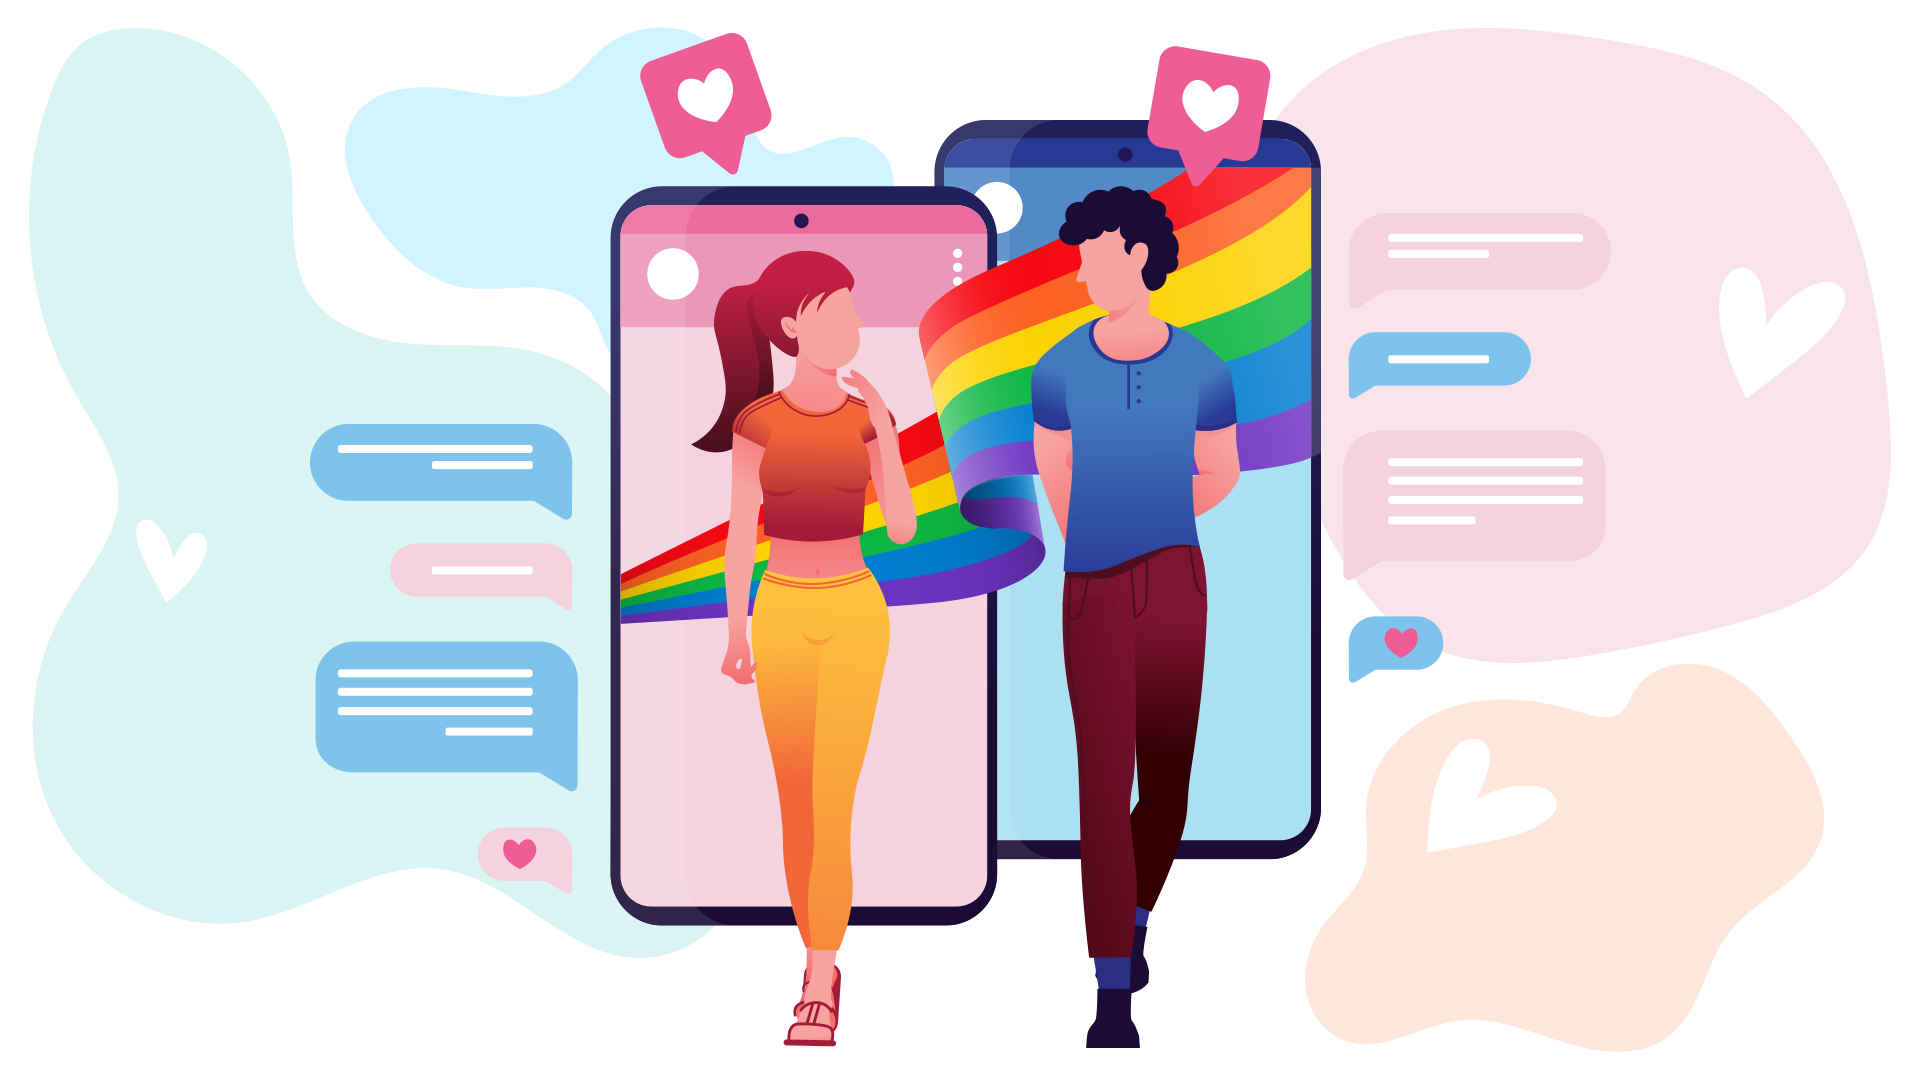 best apps for couples